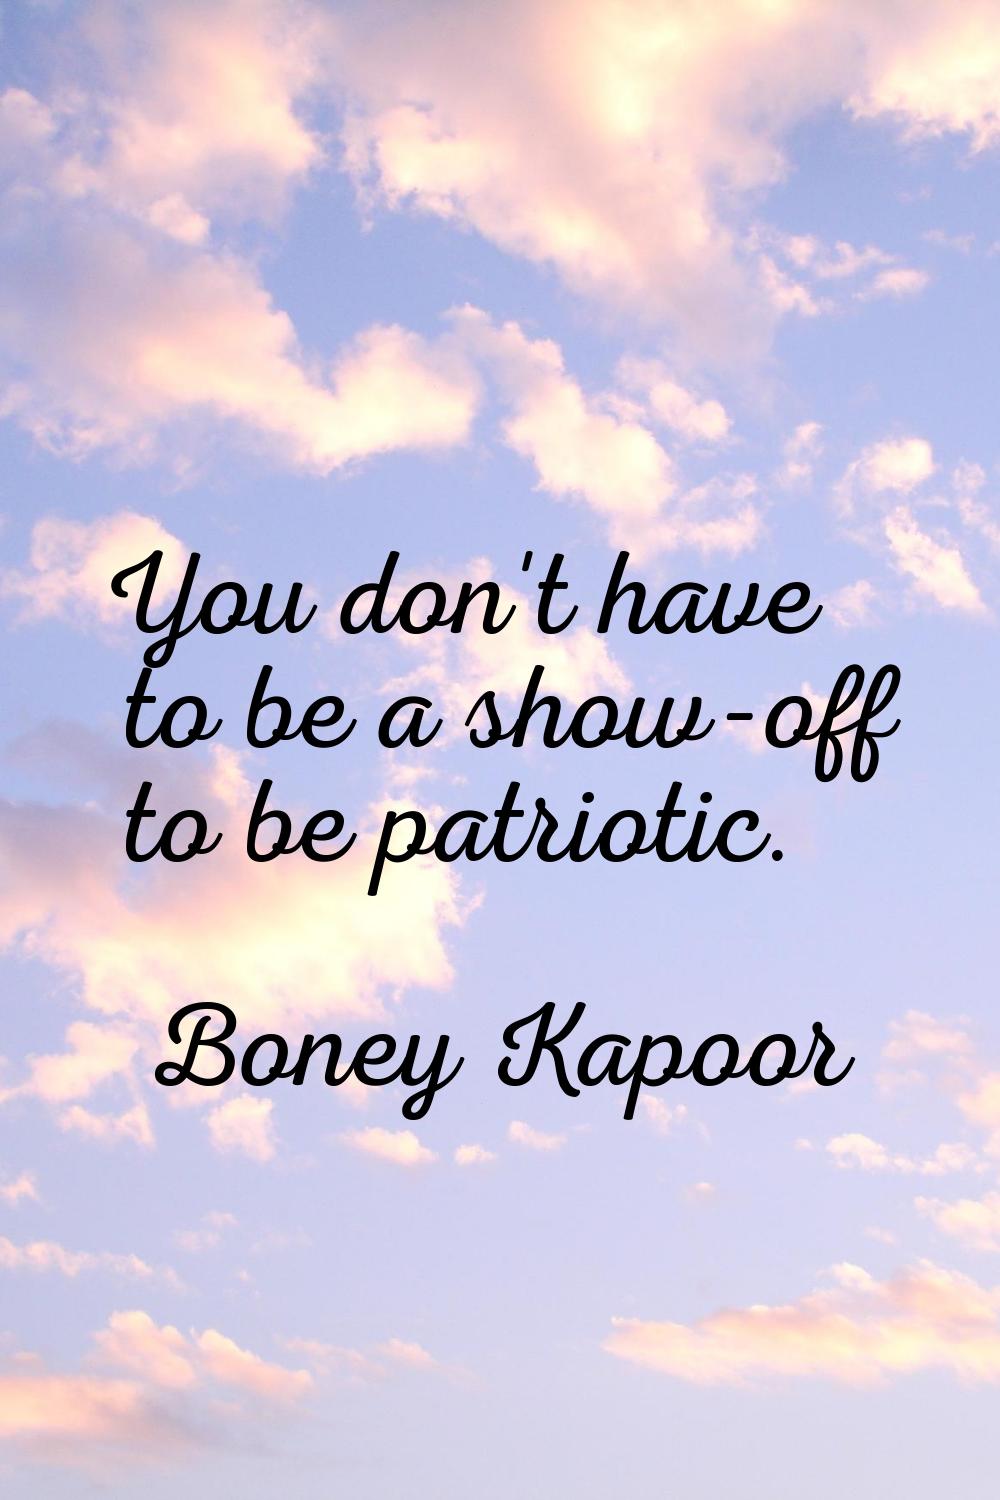 You don't have to be a show-off to be patriotic.